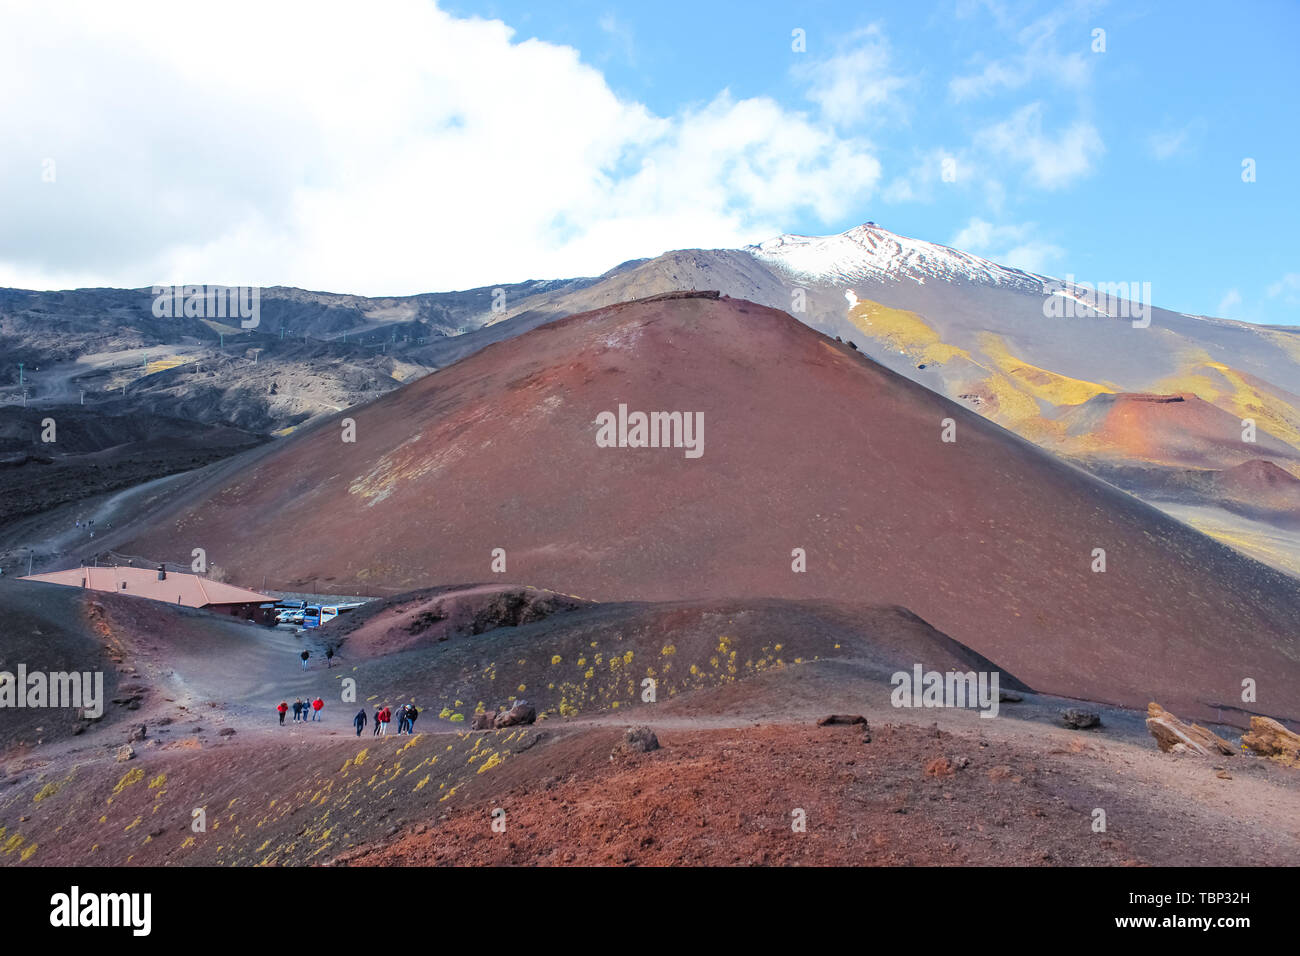 Mount Etna, Sicily, Italy - April 9th 2019: Hikers walking on the Silvestri craters on the Mount Etna. The very top of Etna volcano with snow in the background. Popular tourist spot. Stock Photo